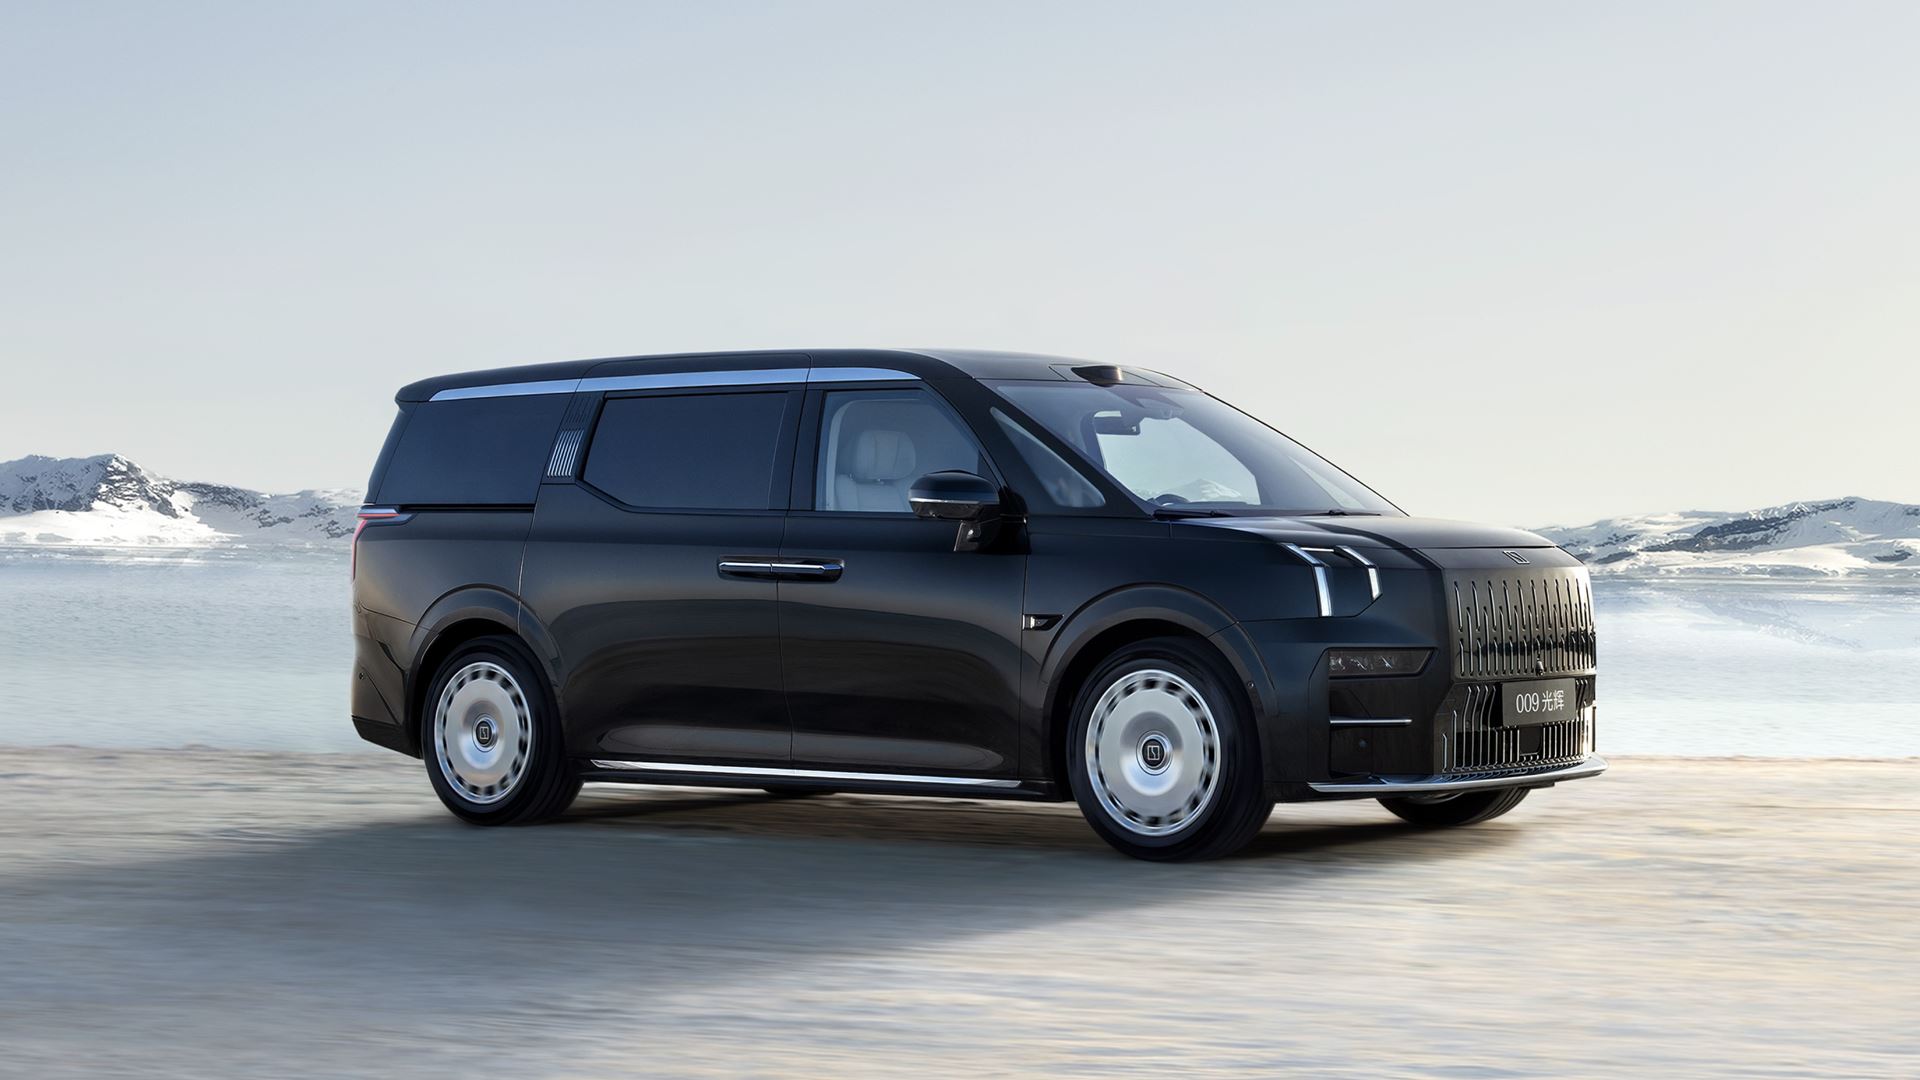 Zeekr Presents Deluxe Version of its MPV Named the 009 Grand